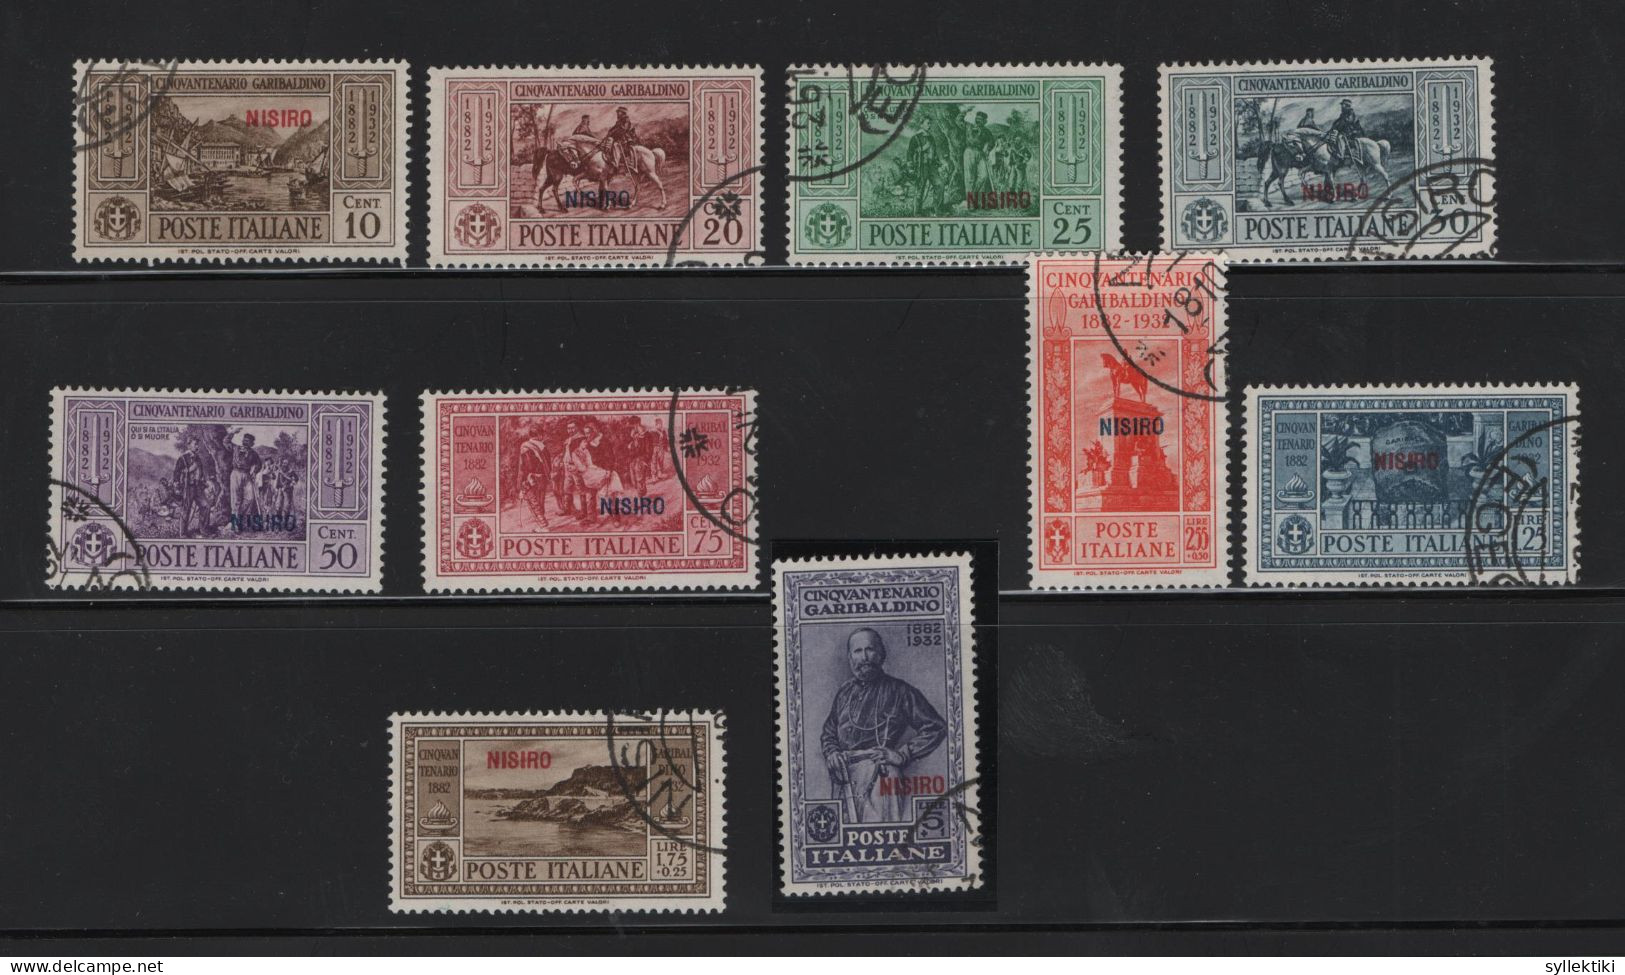 GREECE 1932 DODECANESE GARIBALDI ISSUE NISIRO OVERPRINT COMPLETE SET USD STAMPS   HELLAS No 108X - 117X AND VALUE EURO 3 - Dodekanisos